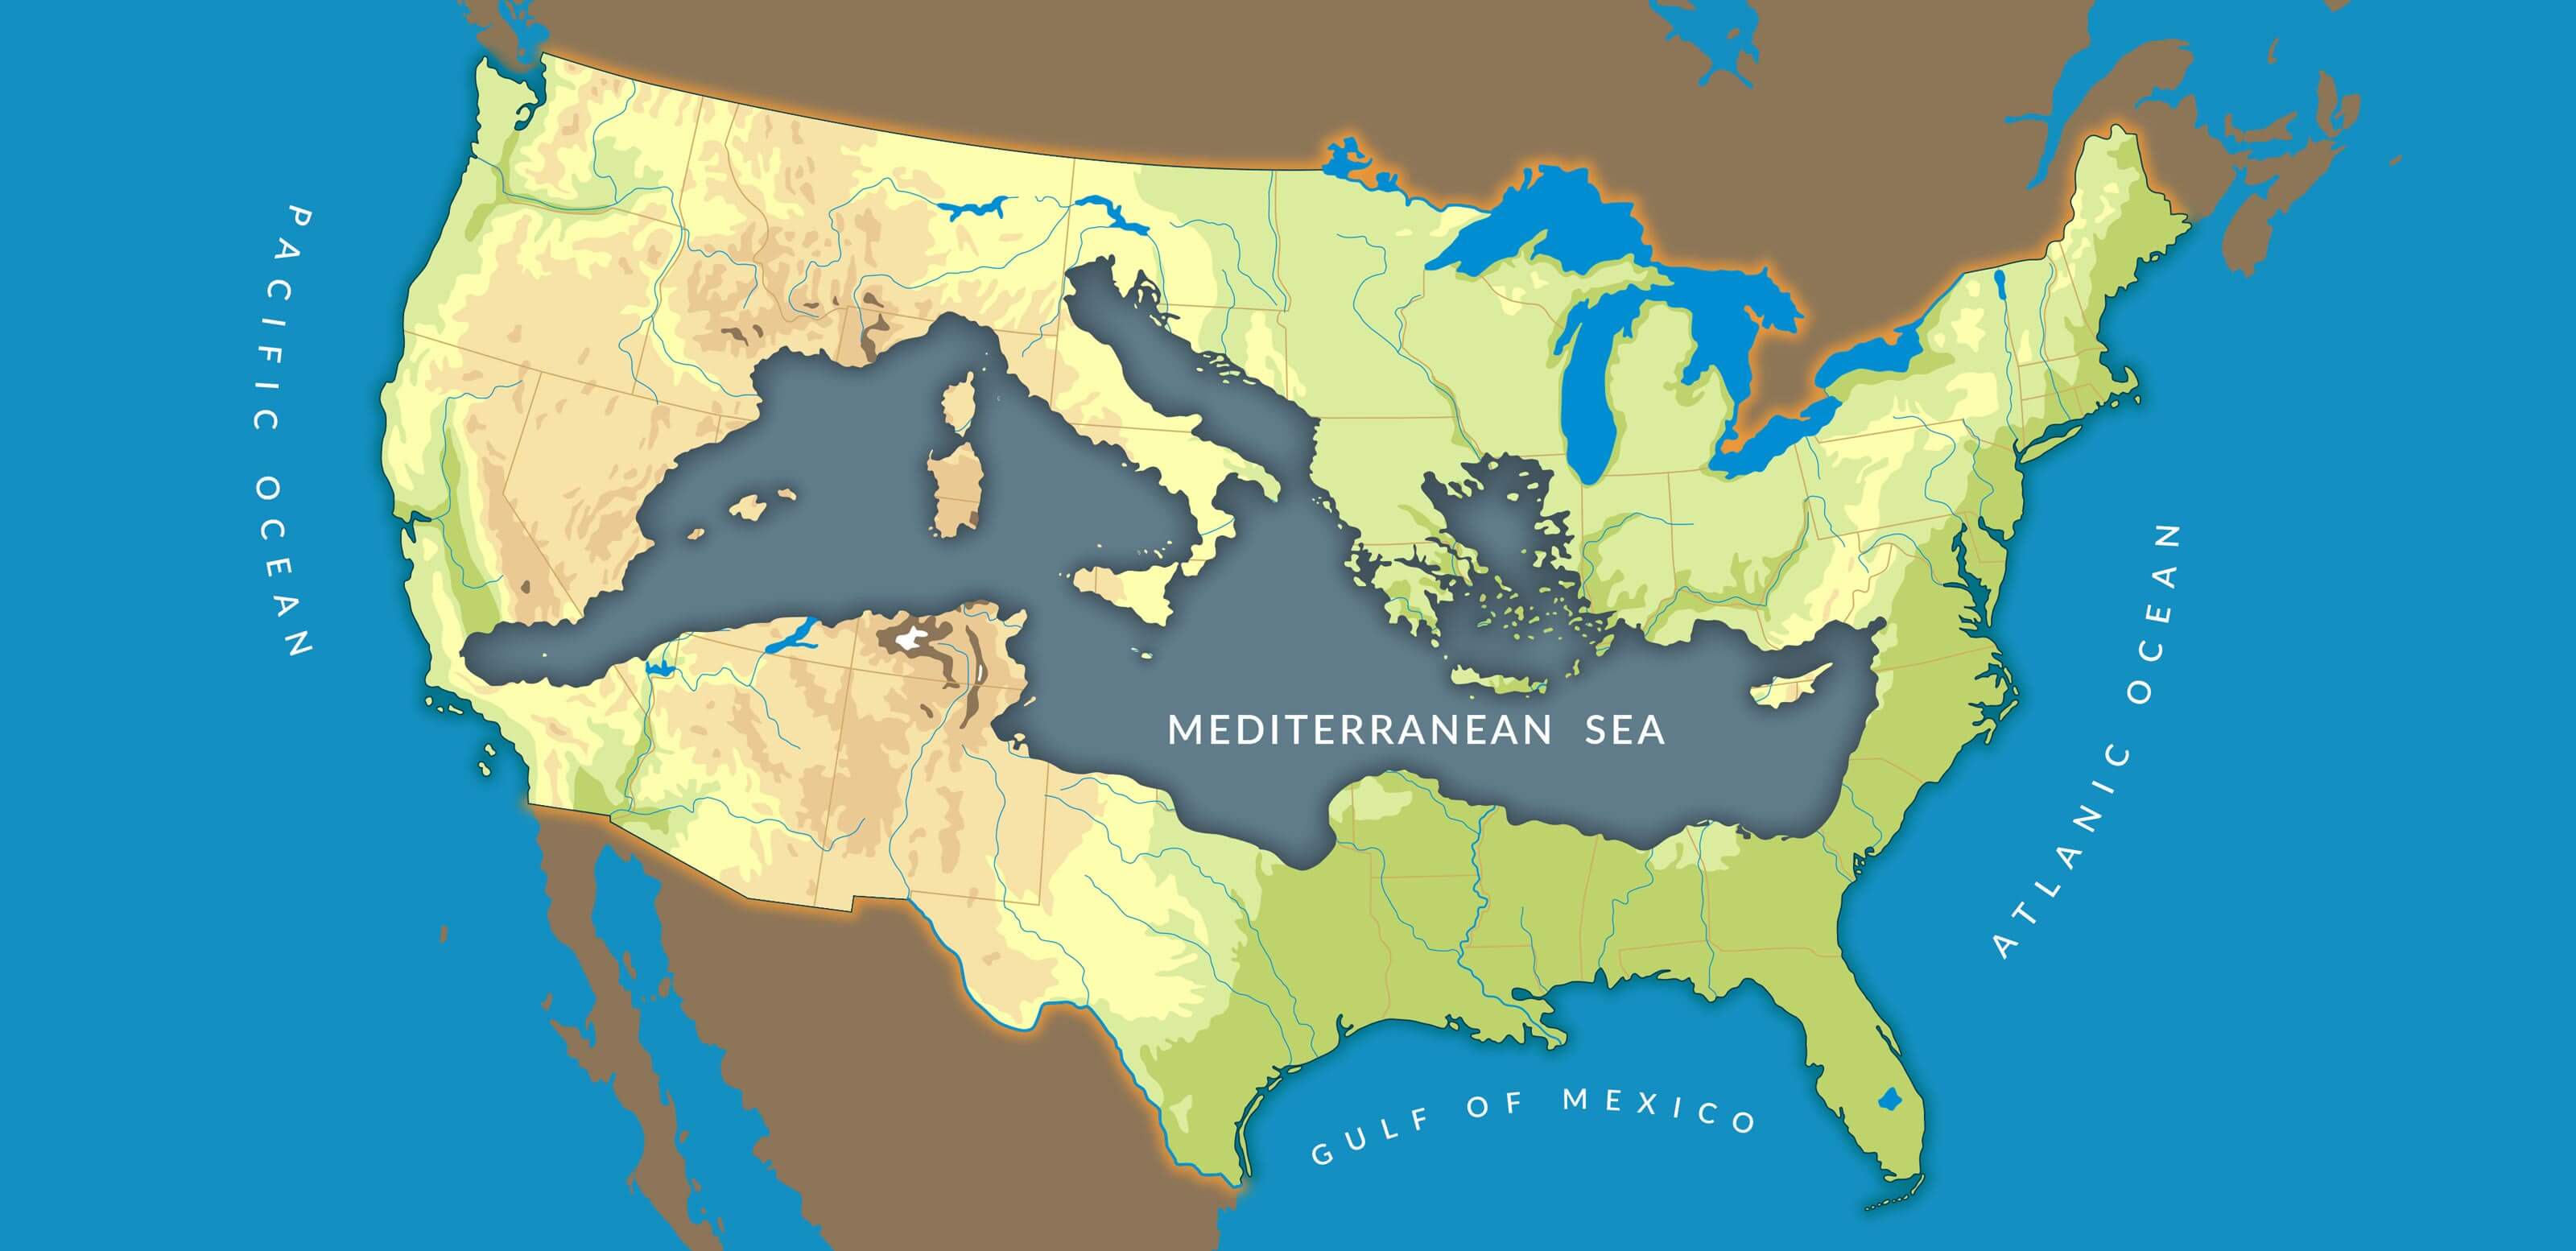 Mediterranean Sea overlaid on the United States to show scale